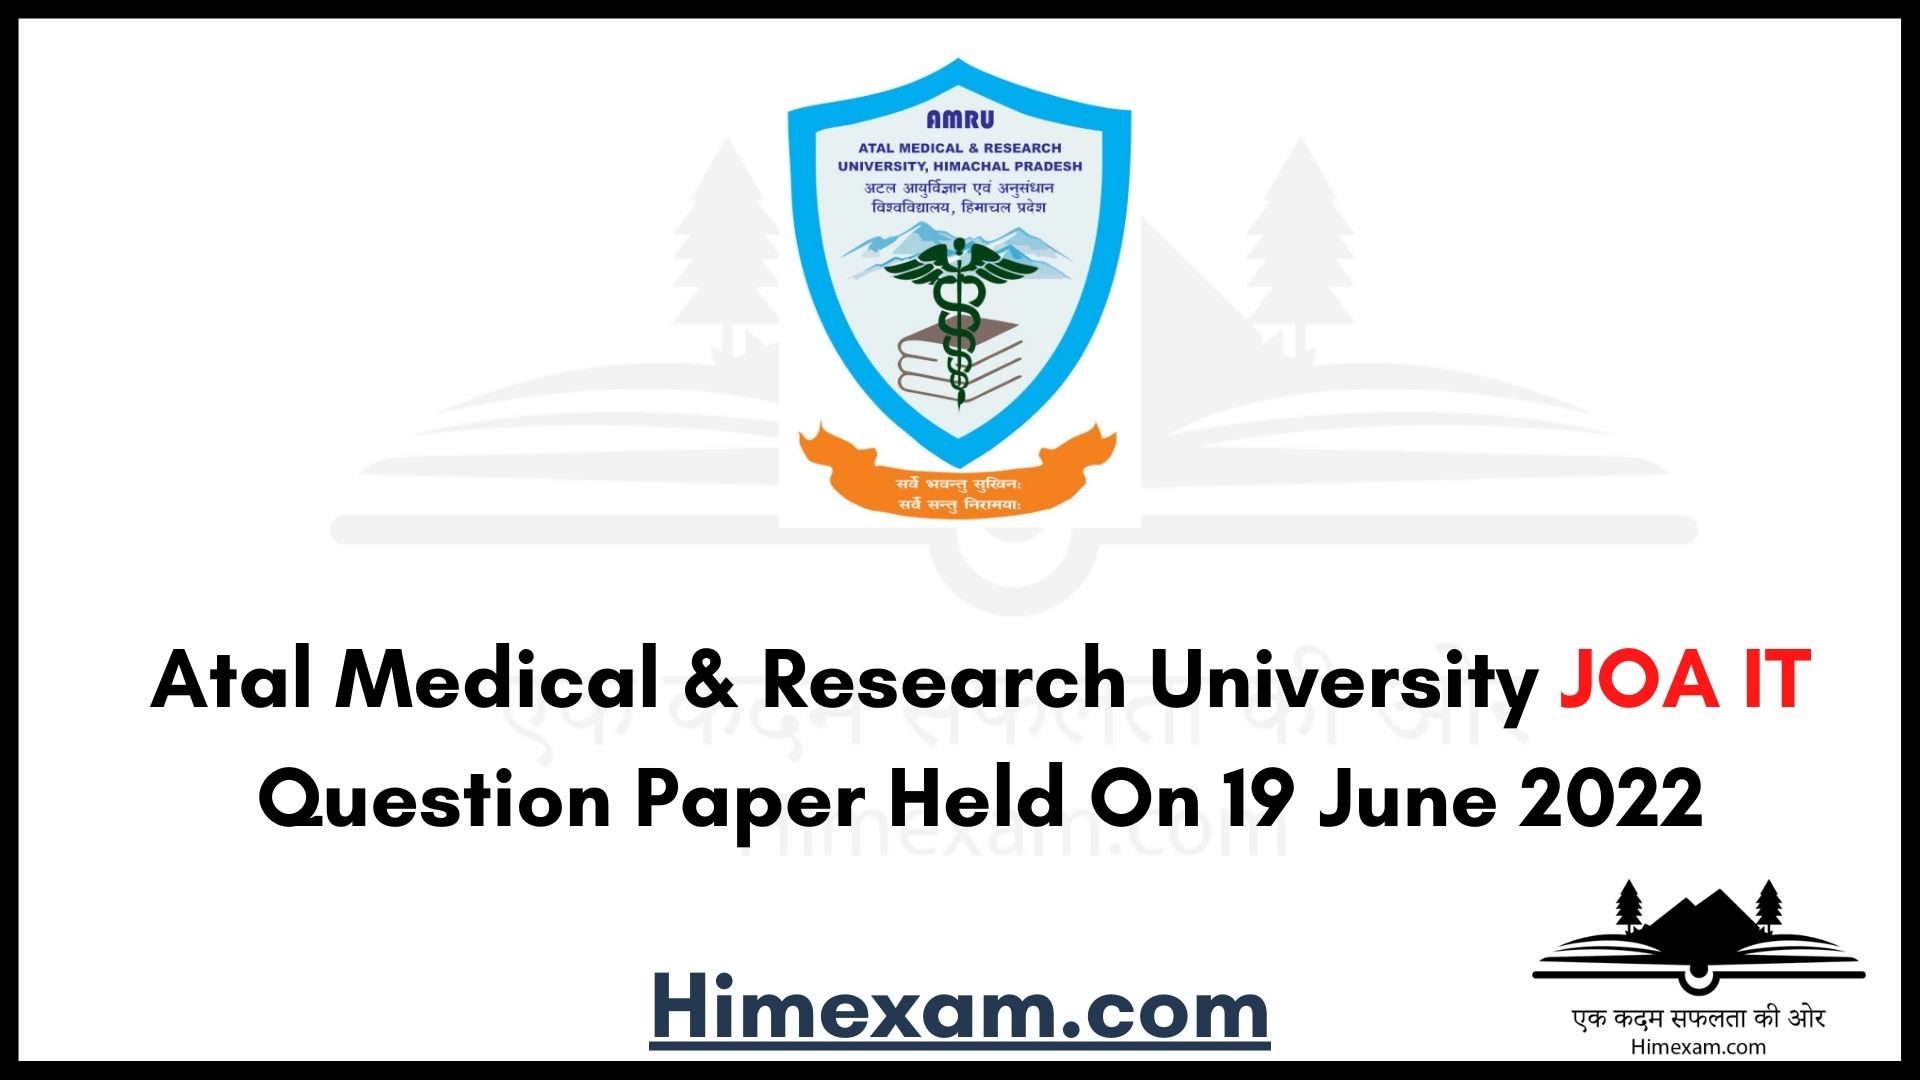 Atal Medical & Research University JOA IT Question Paper Held On 19 June 2022